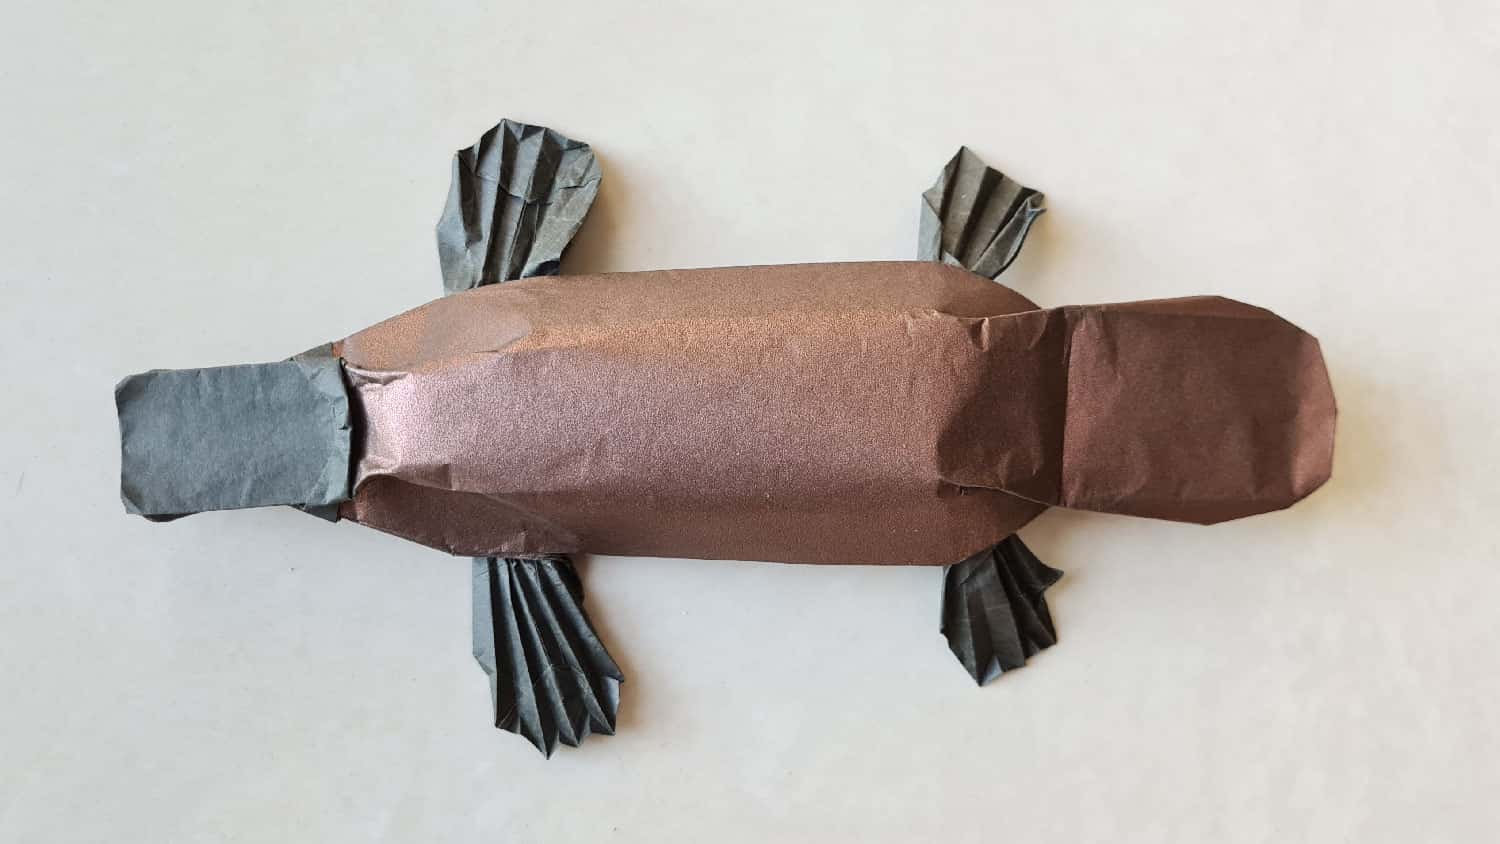 A folded origami platypus model, viewed from the top